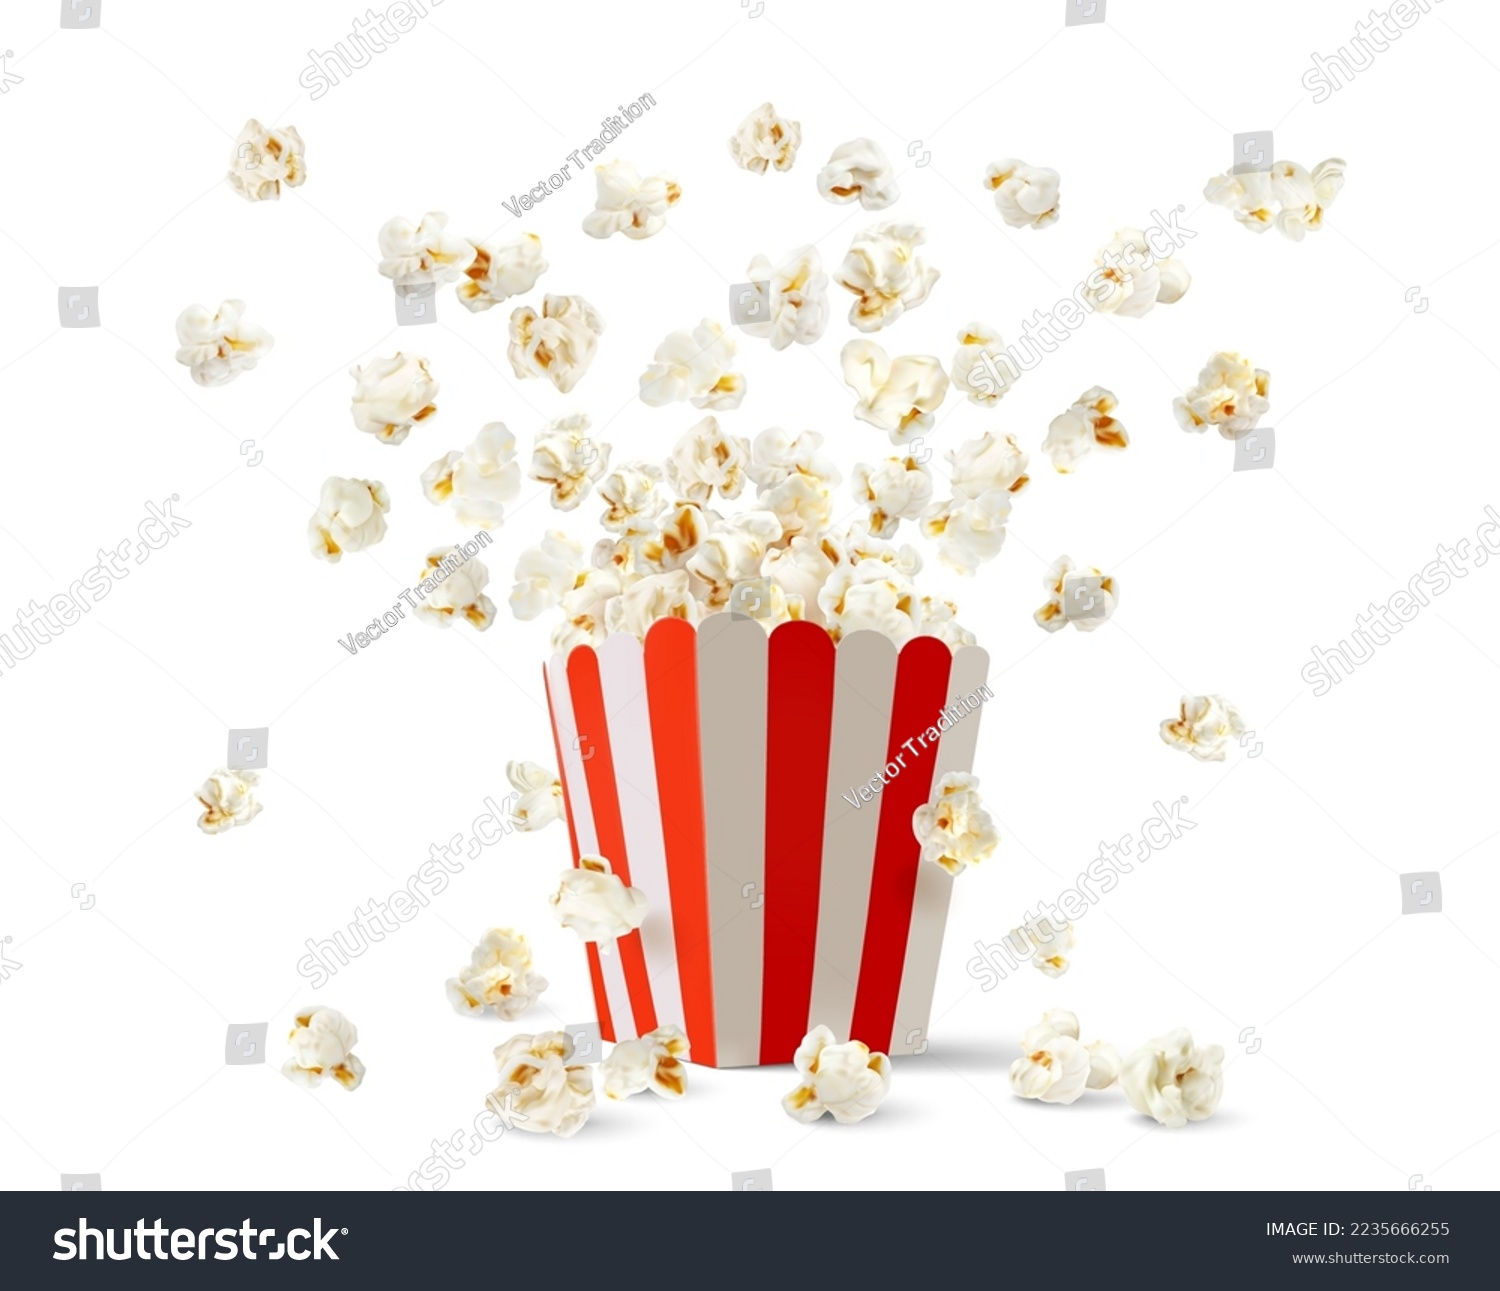 Popcorn box, Striped pop corn bucket container. Realistic vector mock up of white and red paper bucket with flying out and scatter around snack seeds, isolated 3d design for cinema or movie theater #2235666255